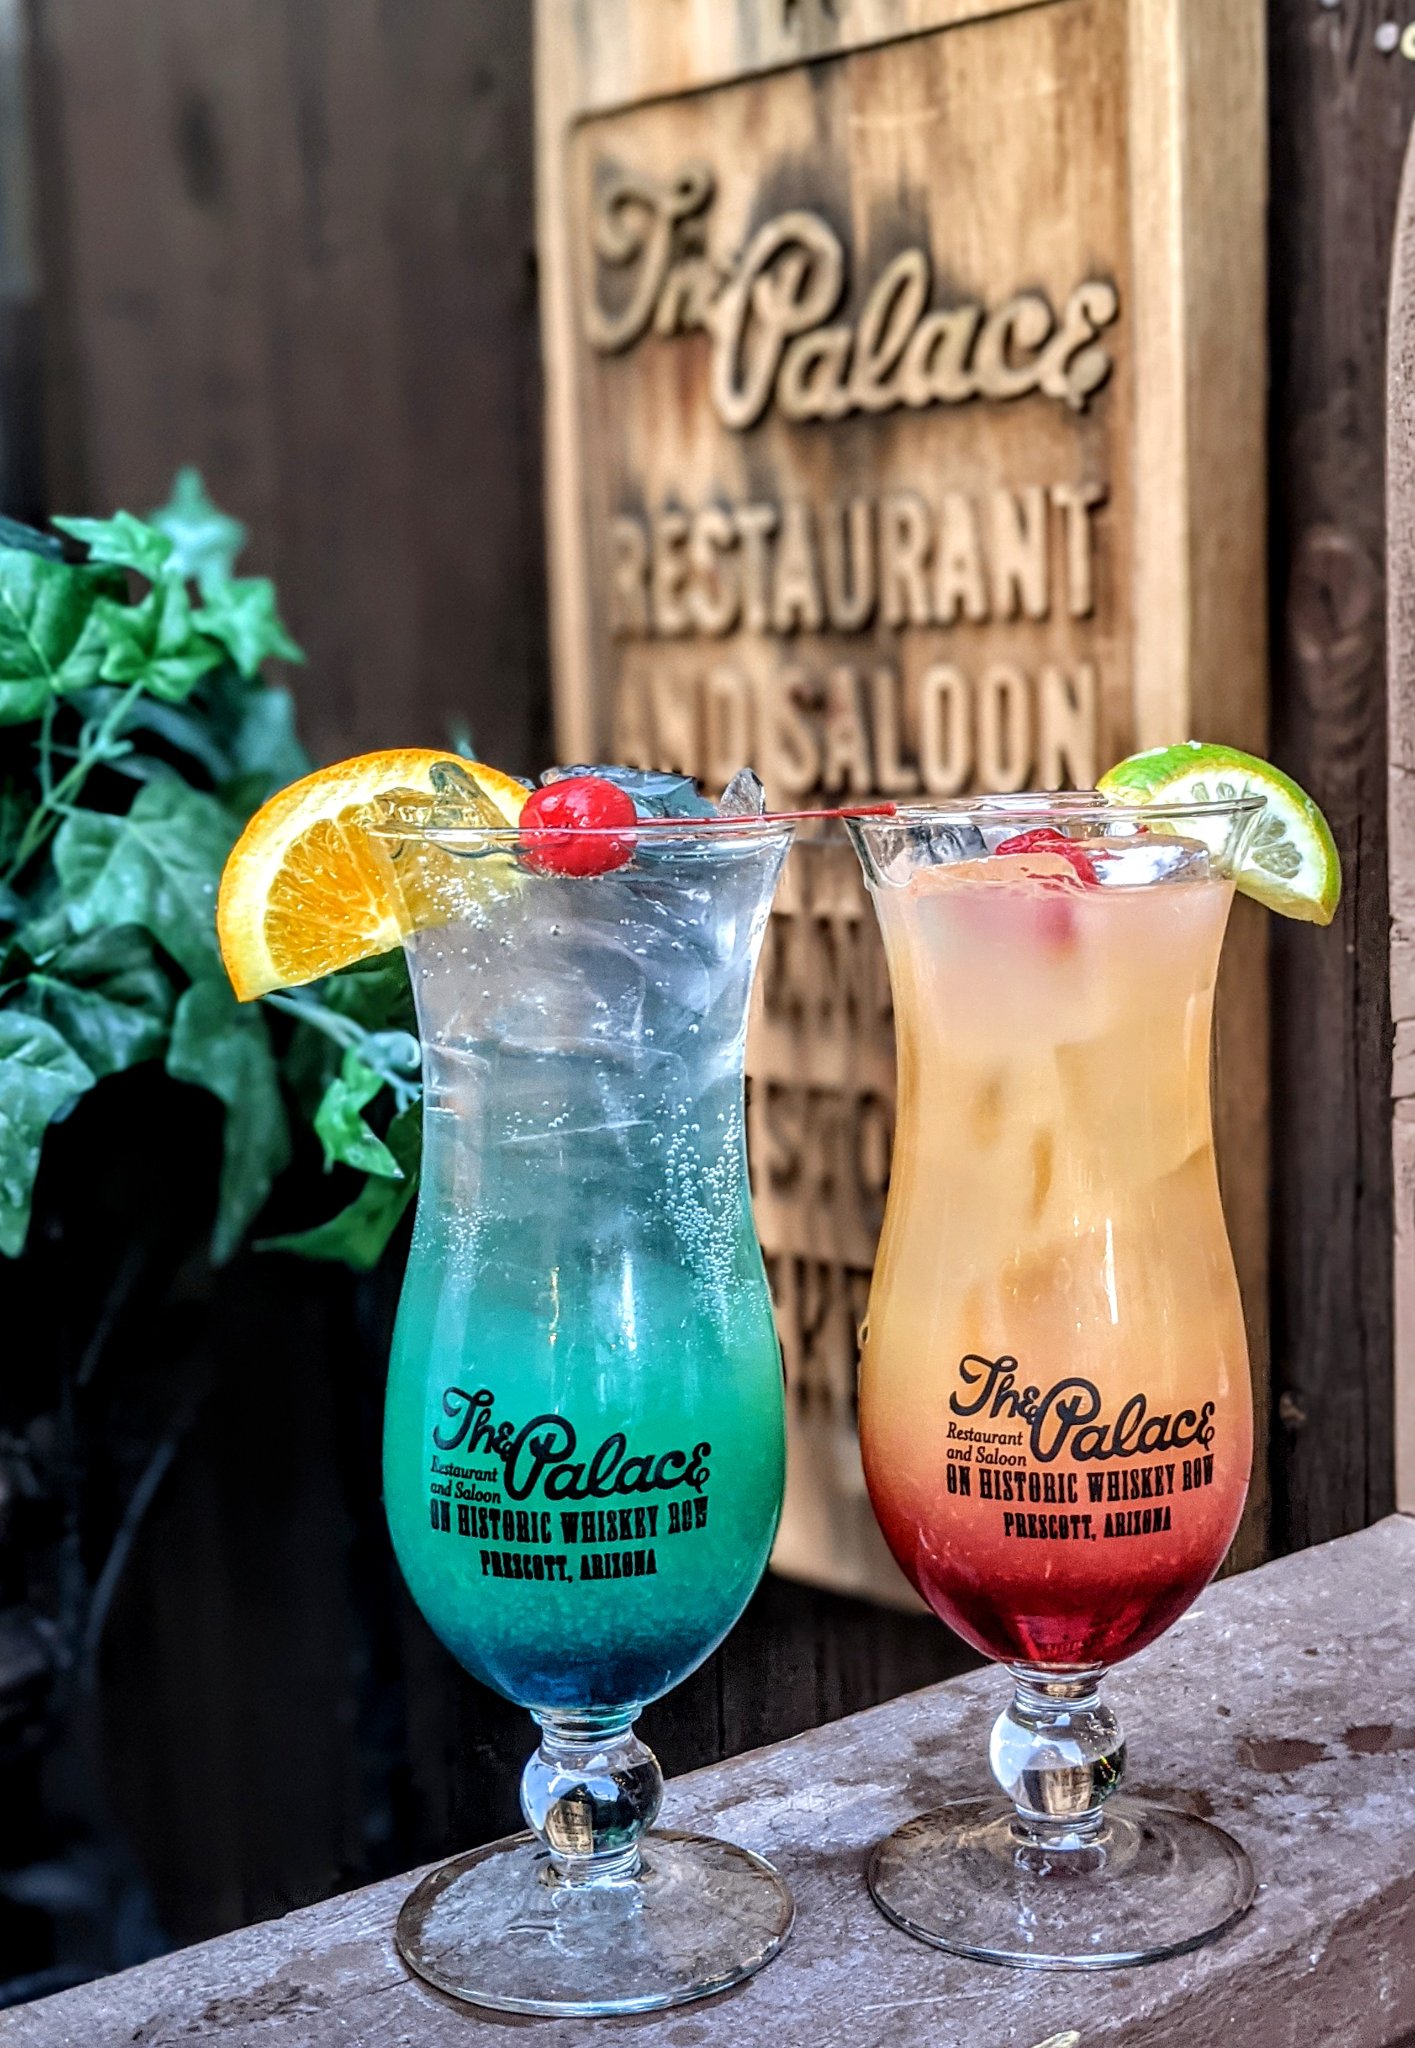 The Palace Restaurant and Saloon drinks